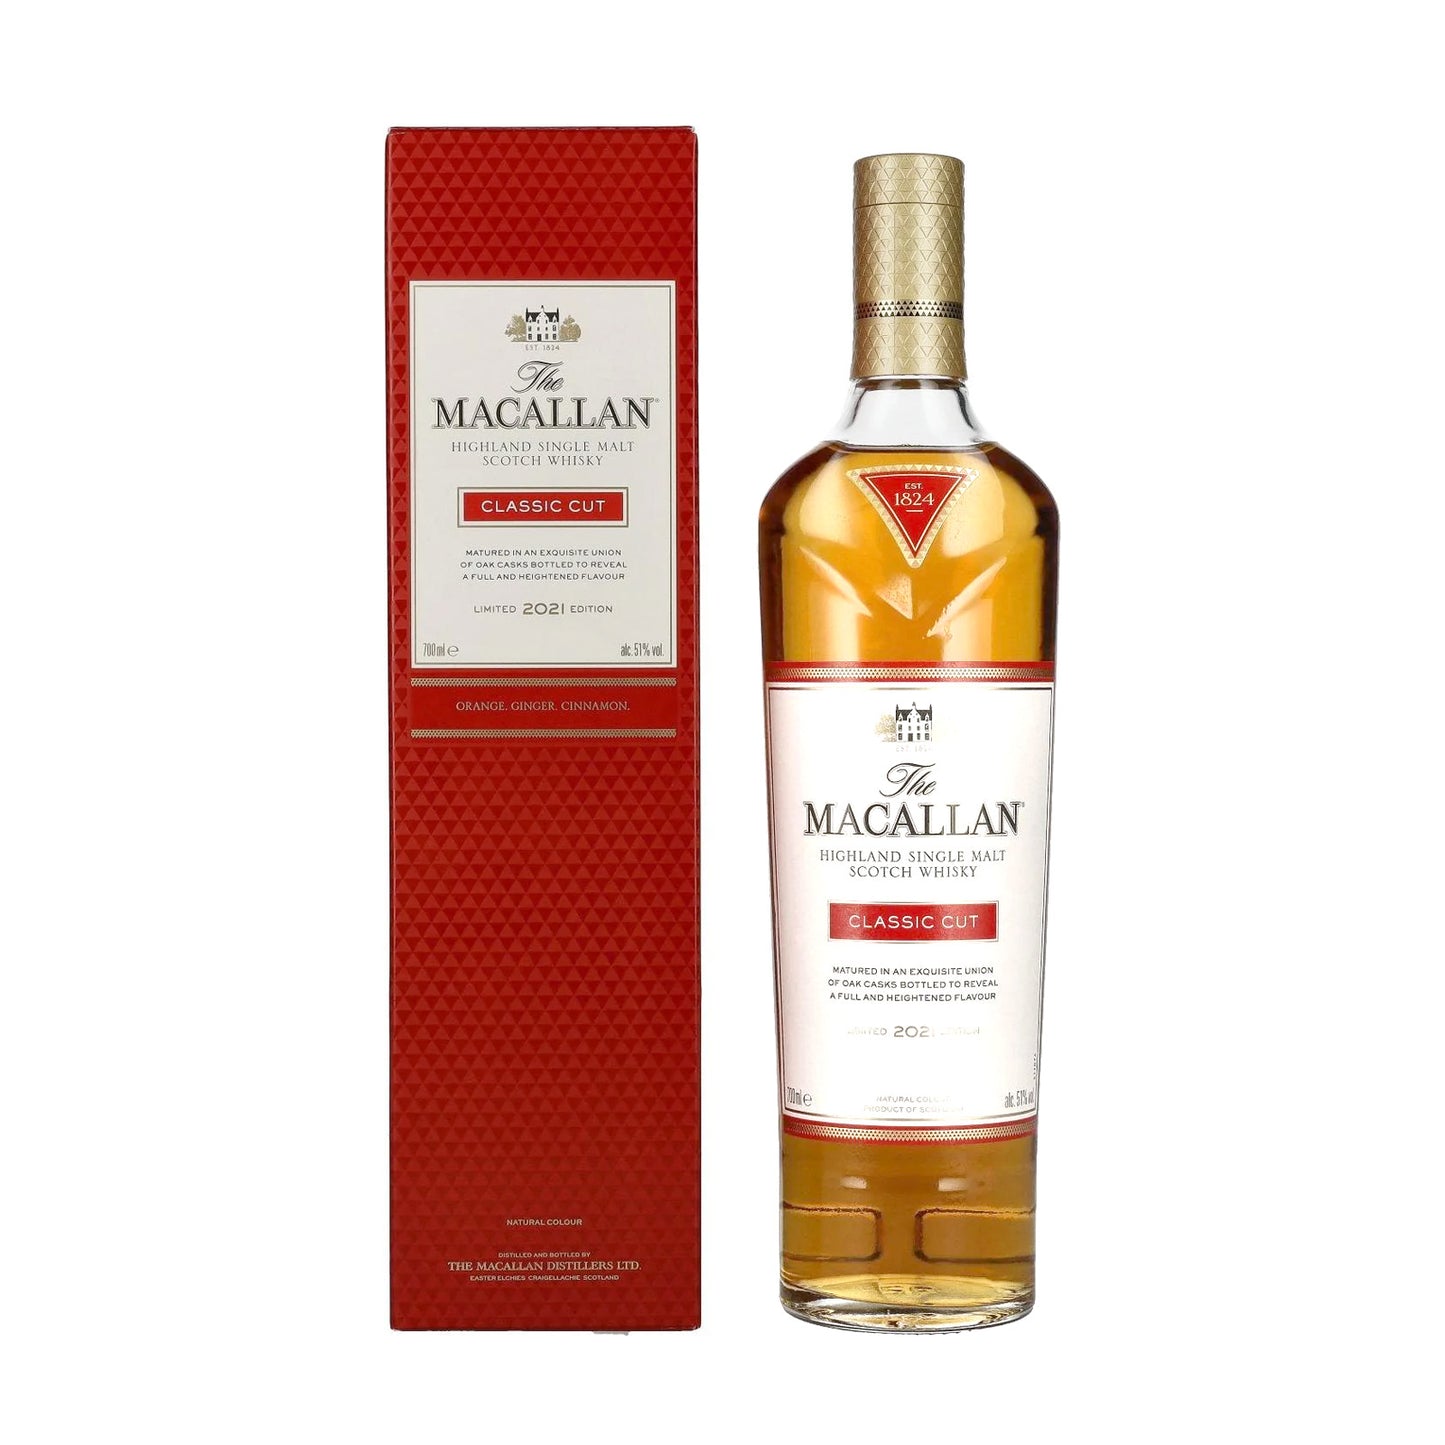 Macallan Classic Cut Whisky 2021 Edition, 700ml Scotch Whisky, from the Highlands, Scotland – GDV Fine Wines, Hong Kong